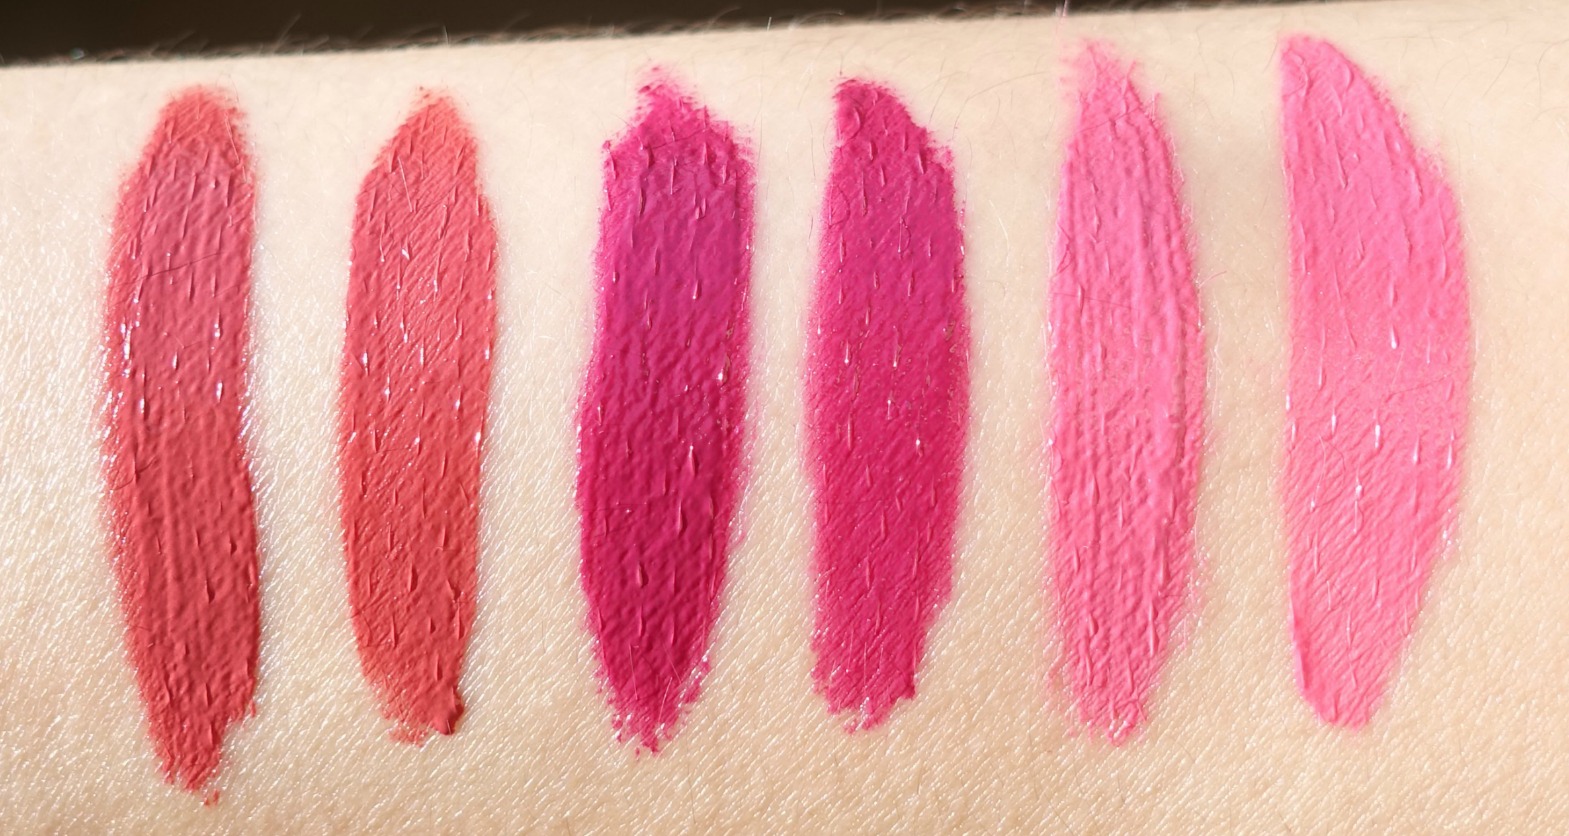 L'Oréal Pro-Matte Gloss First Impressions + Review, Swatches